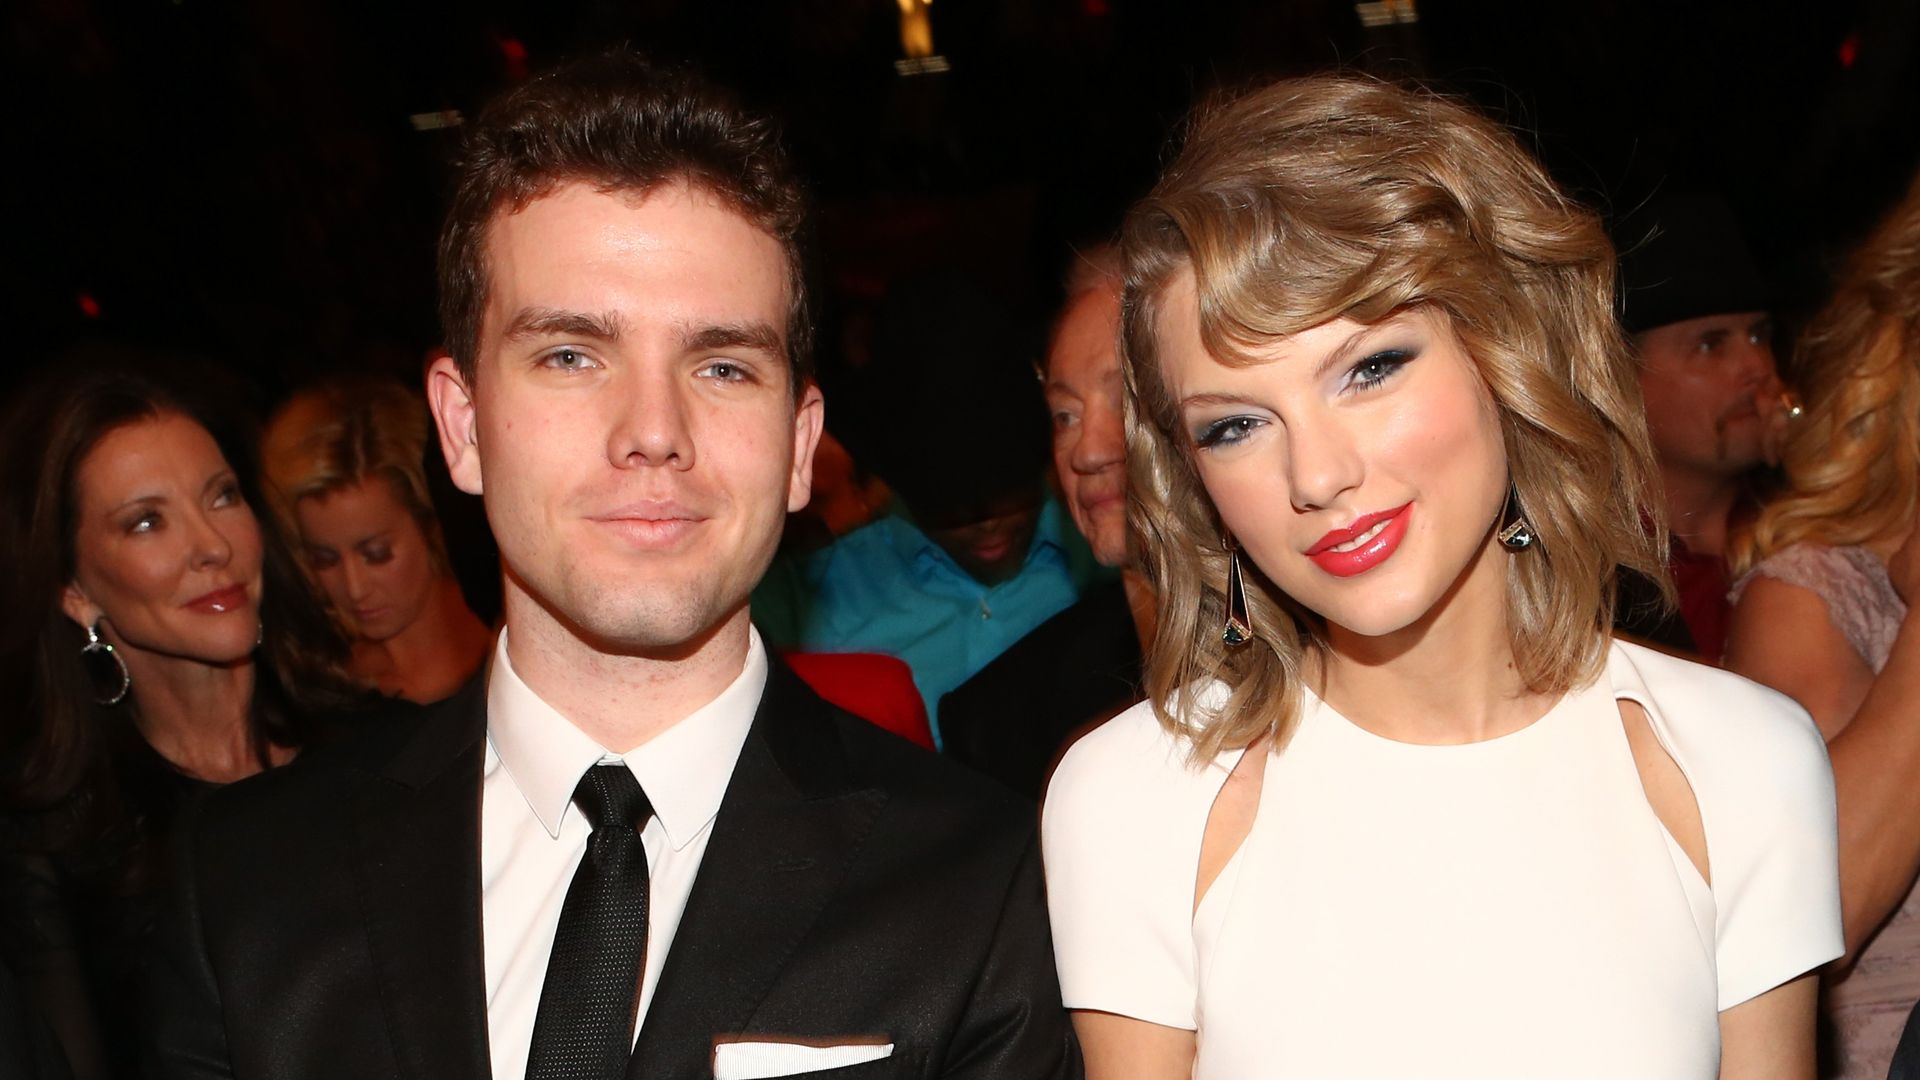 ustin Swift (L) and recording artist Taylor Swift attend the 49th Annual Academy of Country Music Awards 